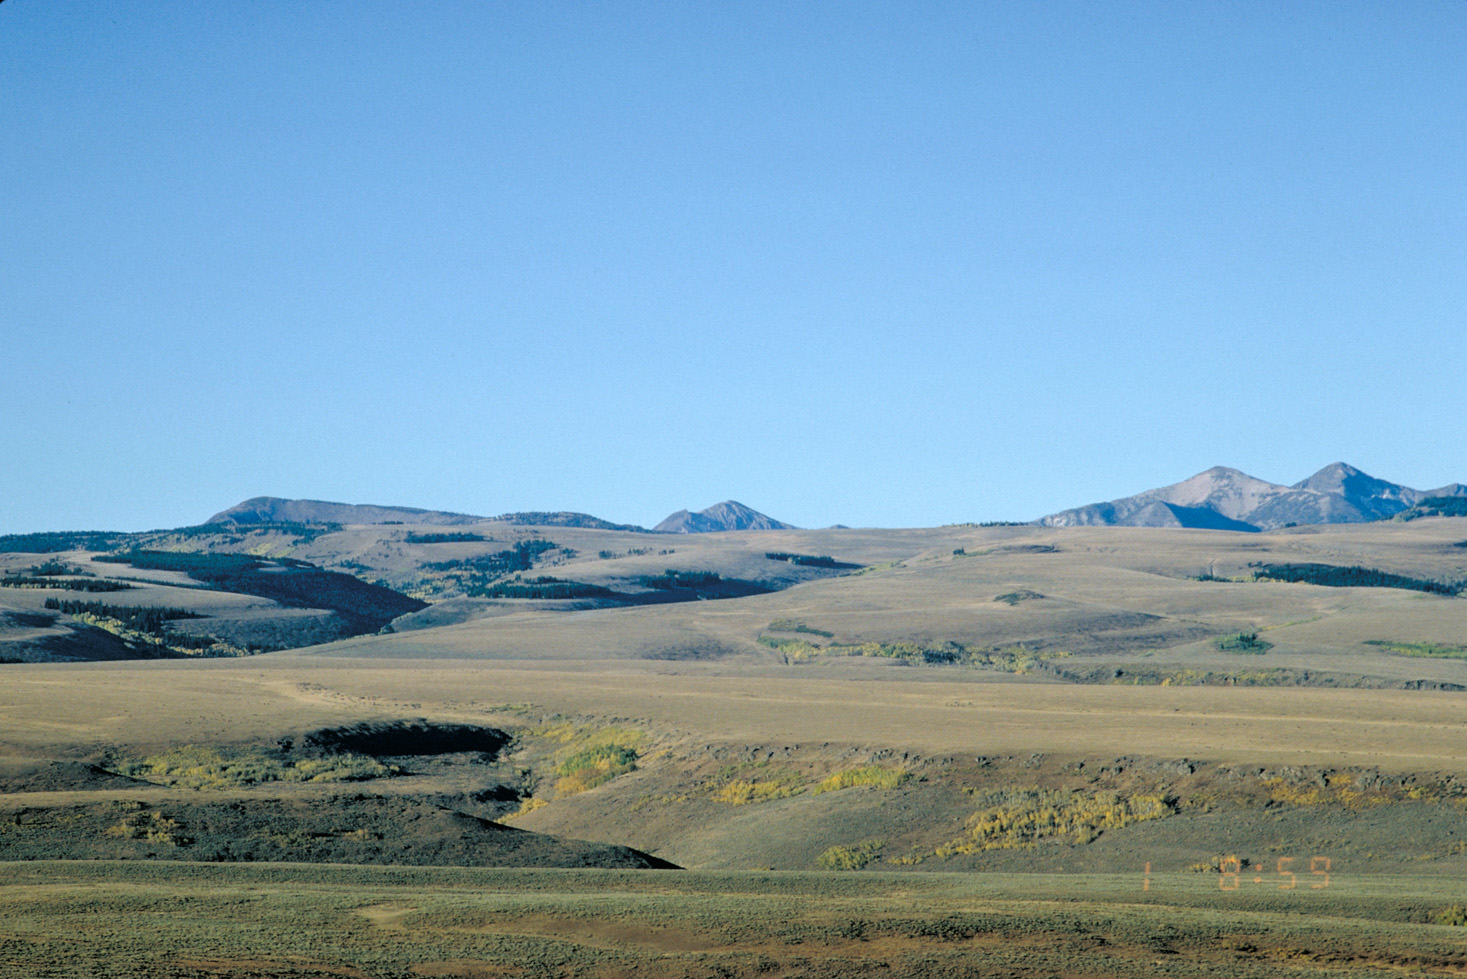 Mary River's Peak in the Jarbidge Wilderness Area during a clear day in the summer season